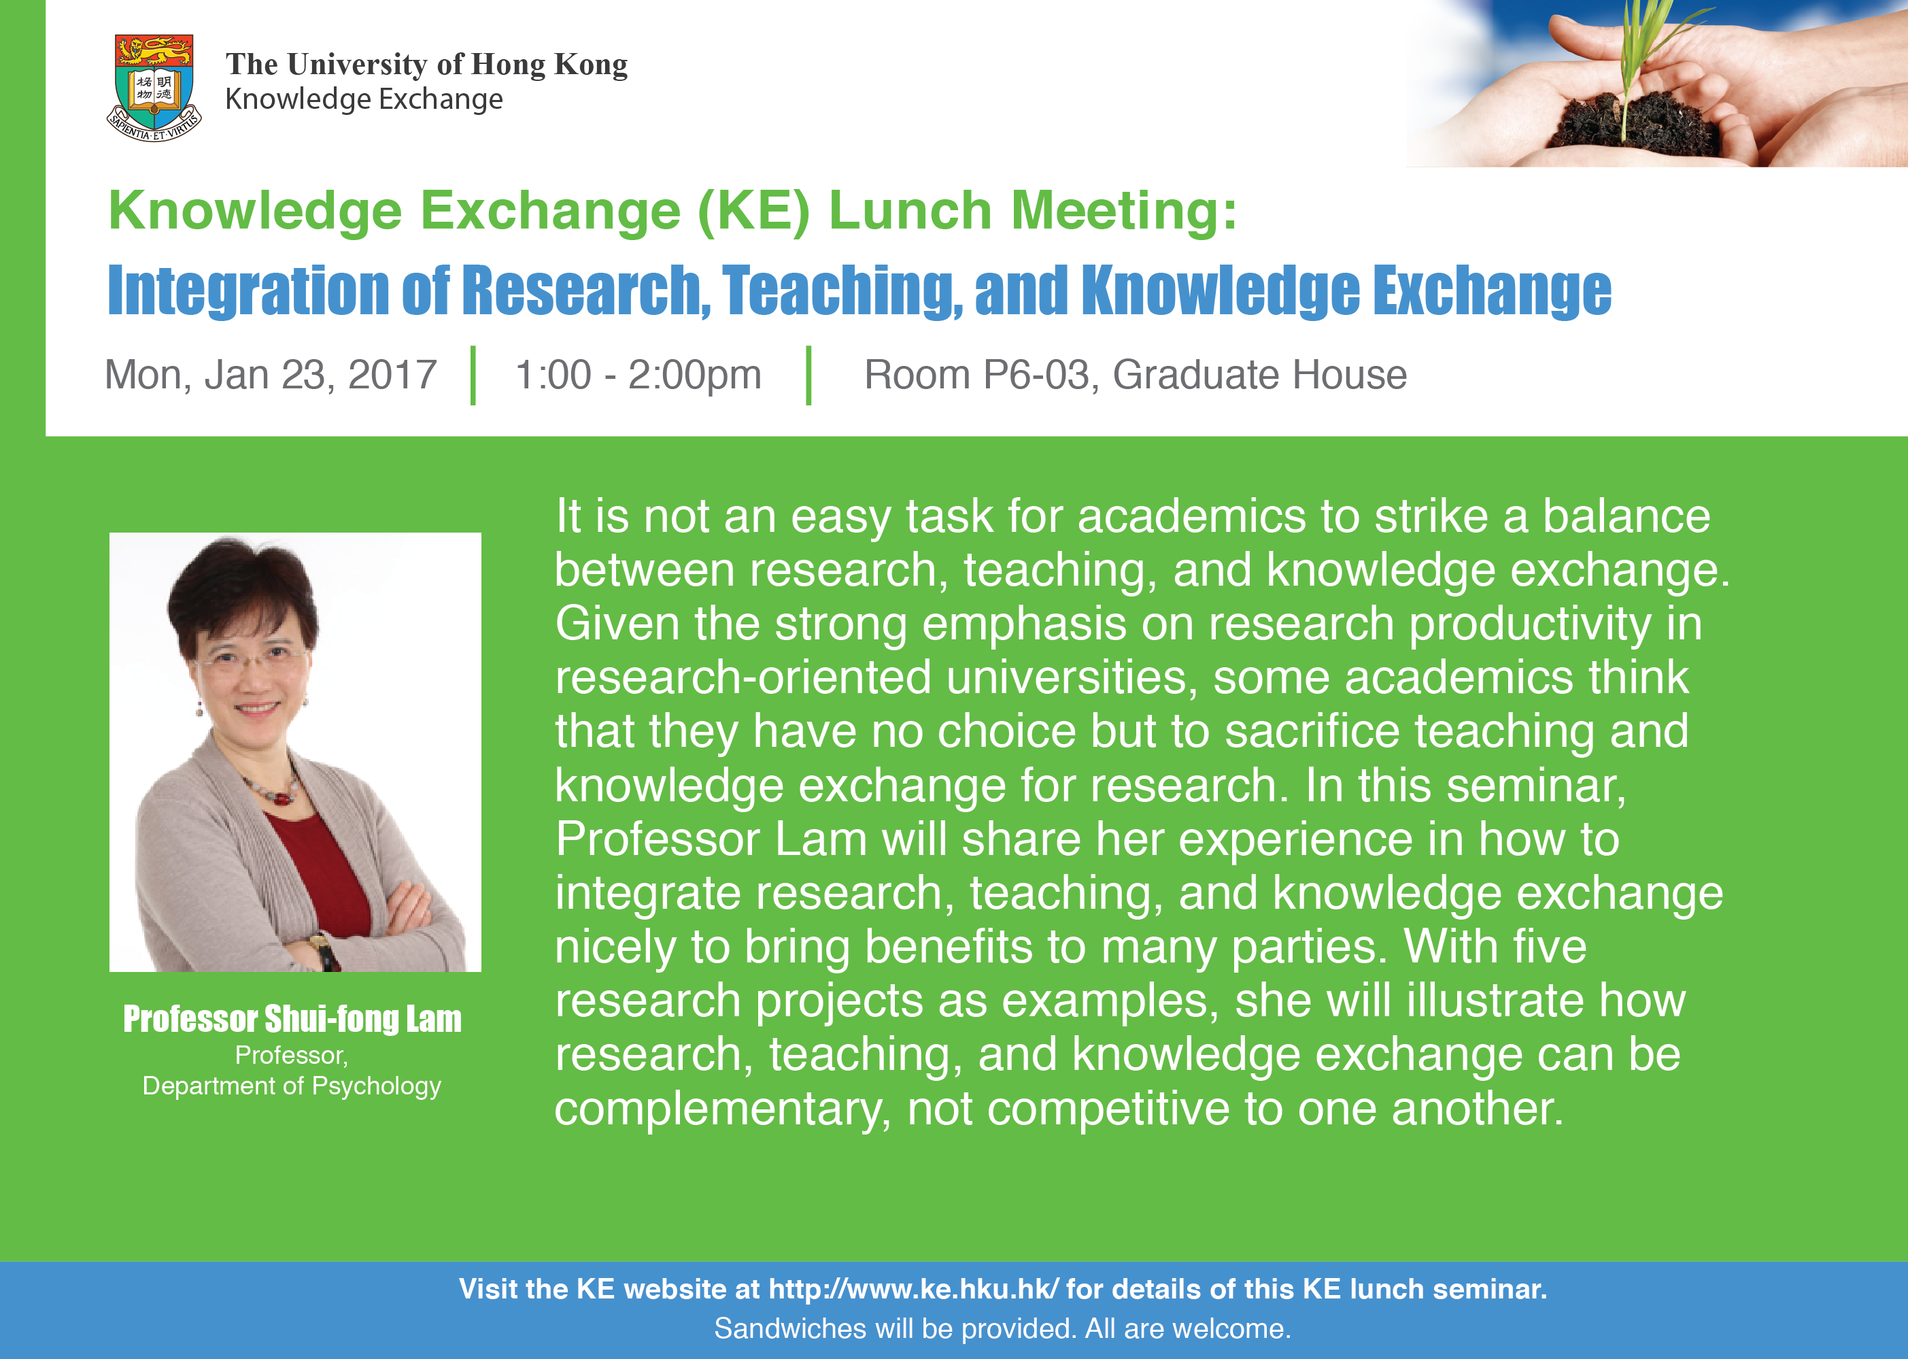 Integration of Research, Teaching, and Knowledge Exchange